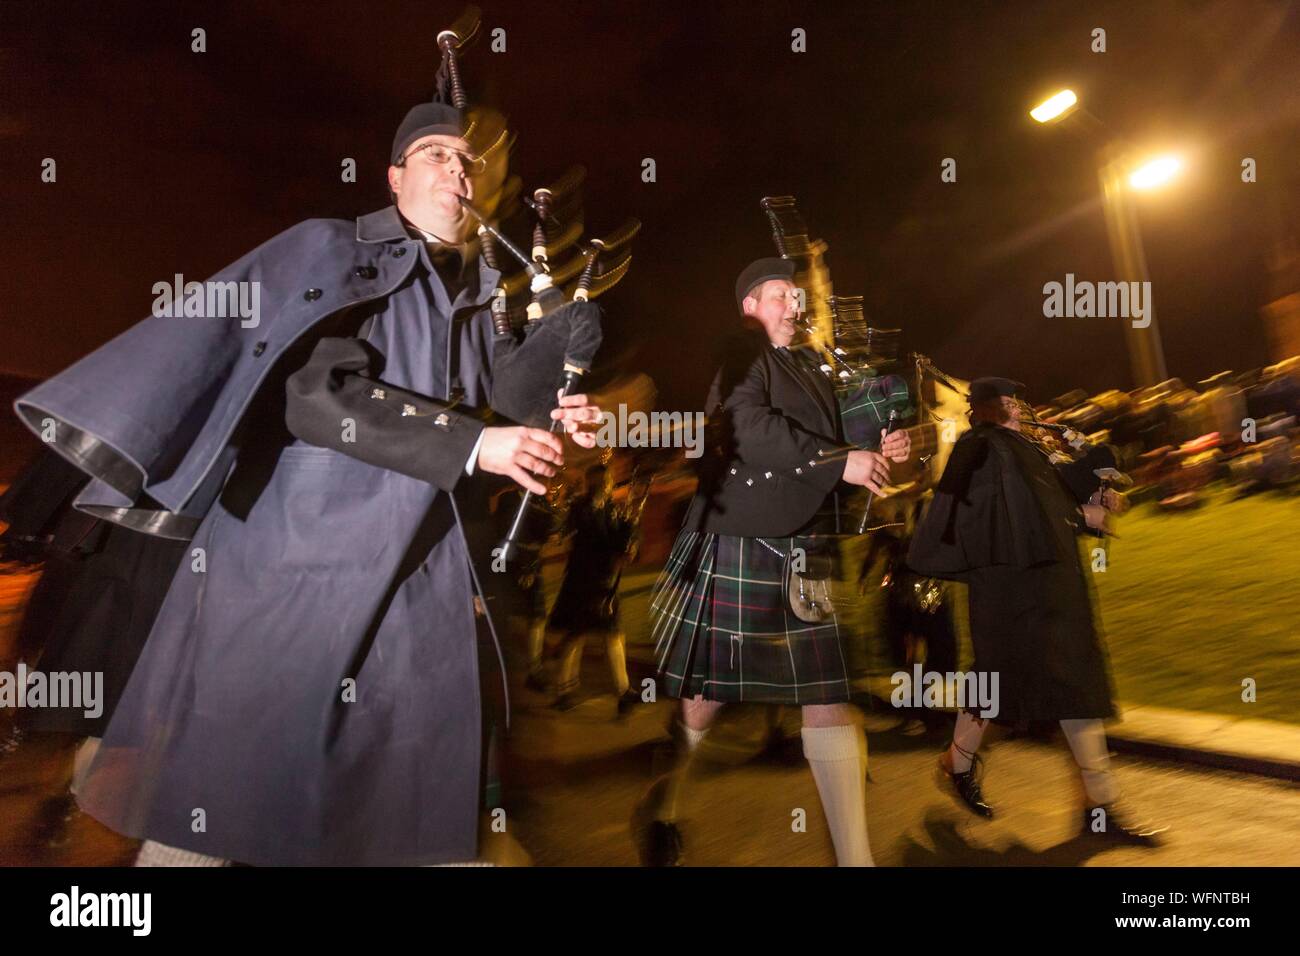 United Kingdom, Scotland, Shetland Islands, Mainland, Lerwick, Up Helly Aa festival, bagpipers parading to the site where the viking longship will be set on fire Stock Photo